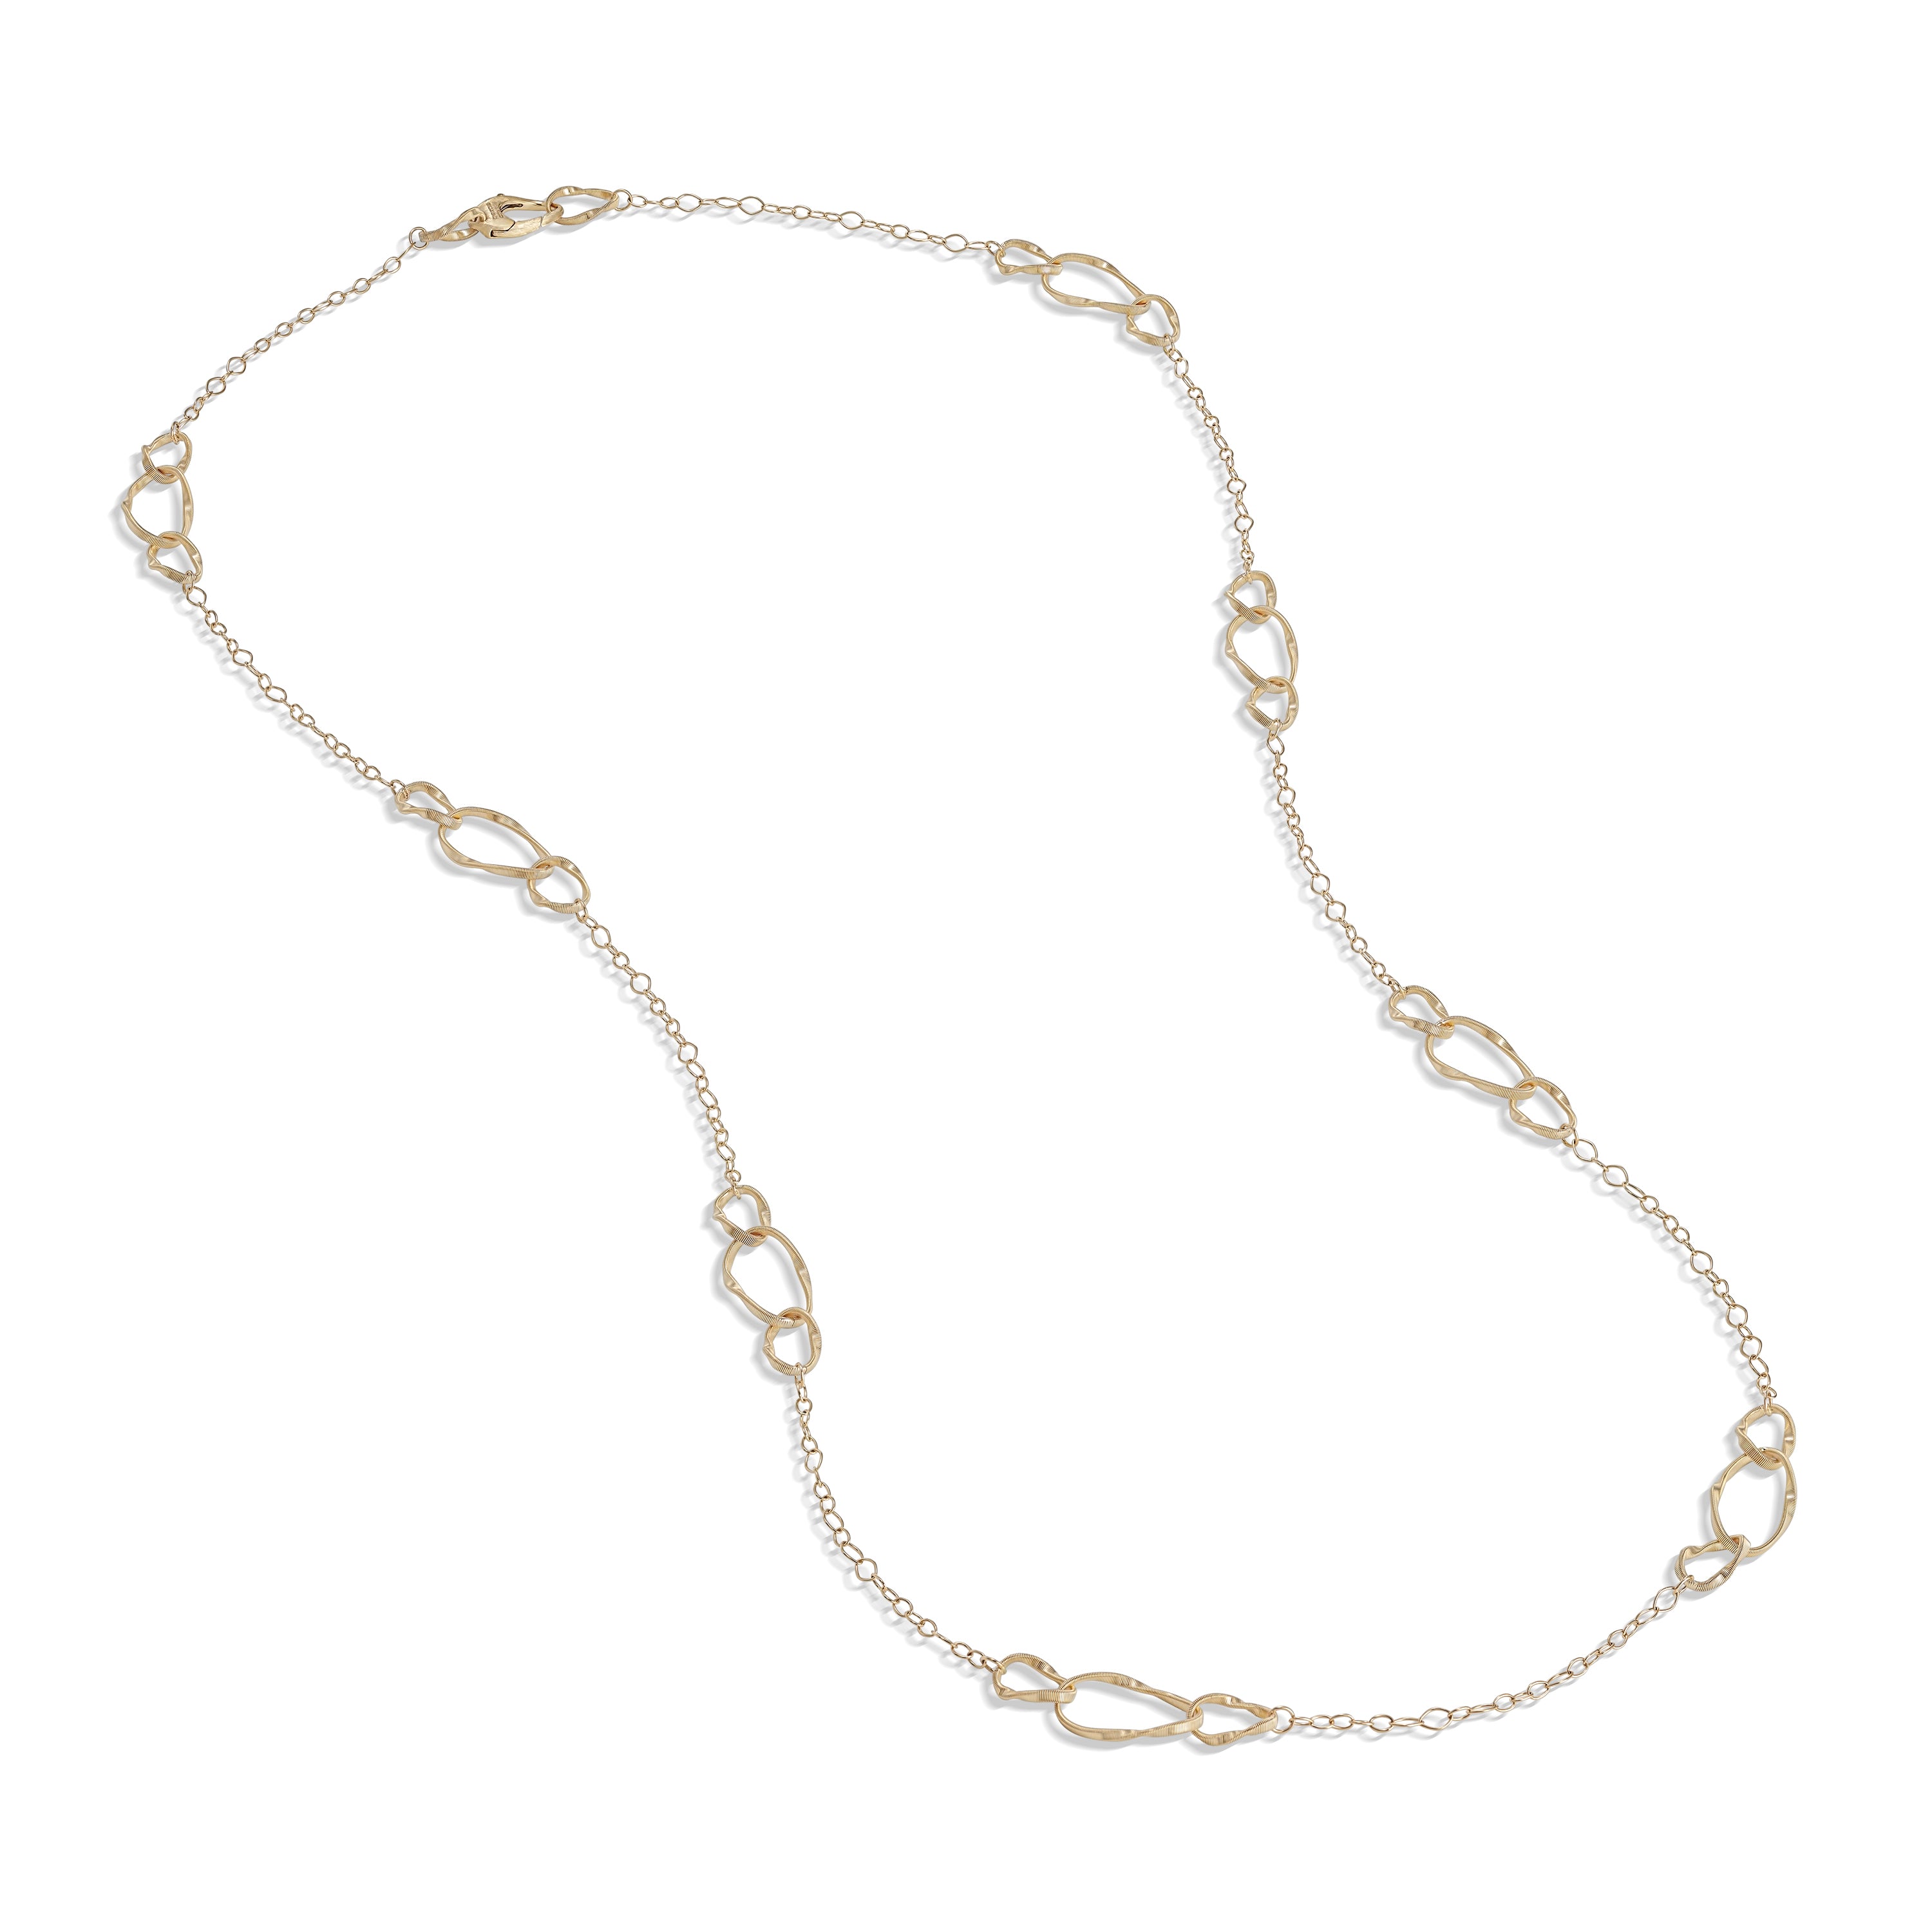 Marco Bicego Marrakech Onde Collection 18K Yellow Gold Link Necklace